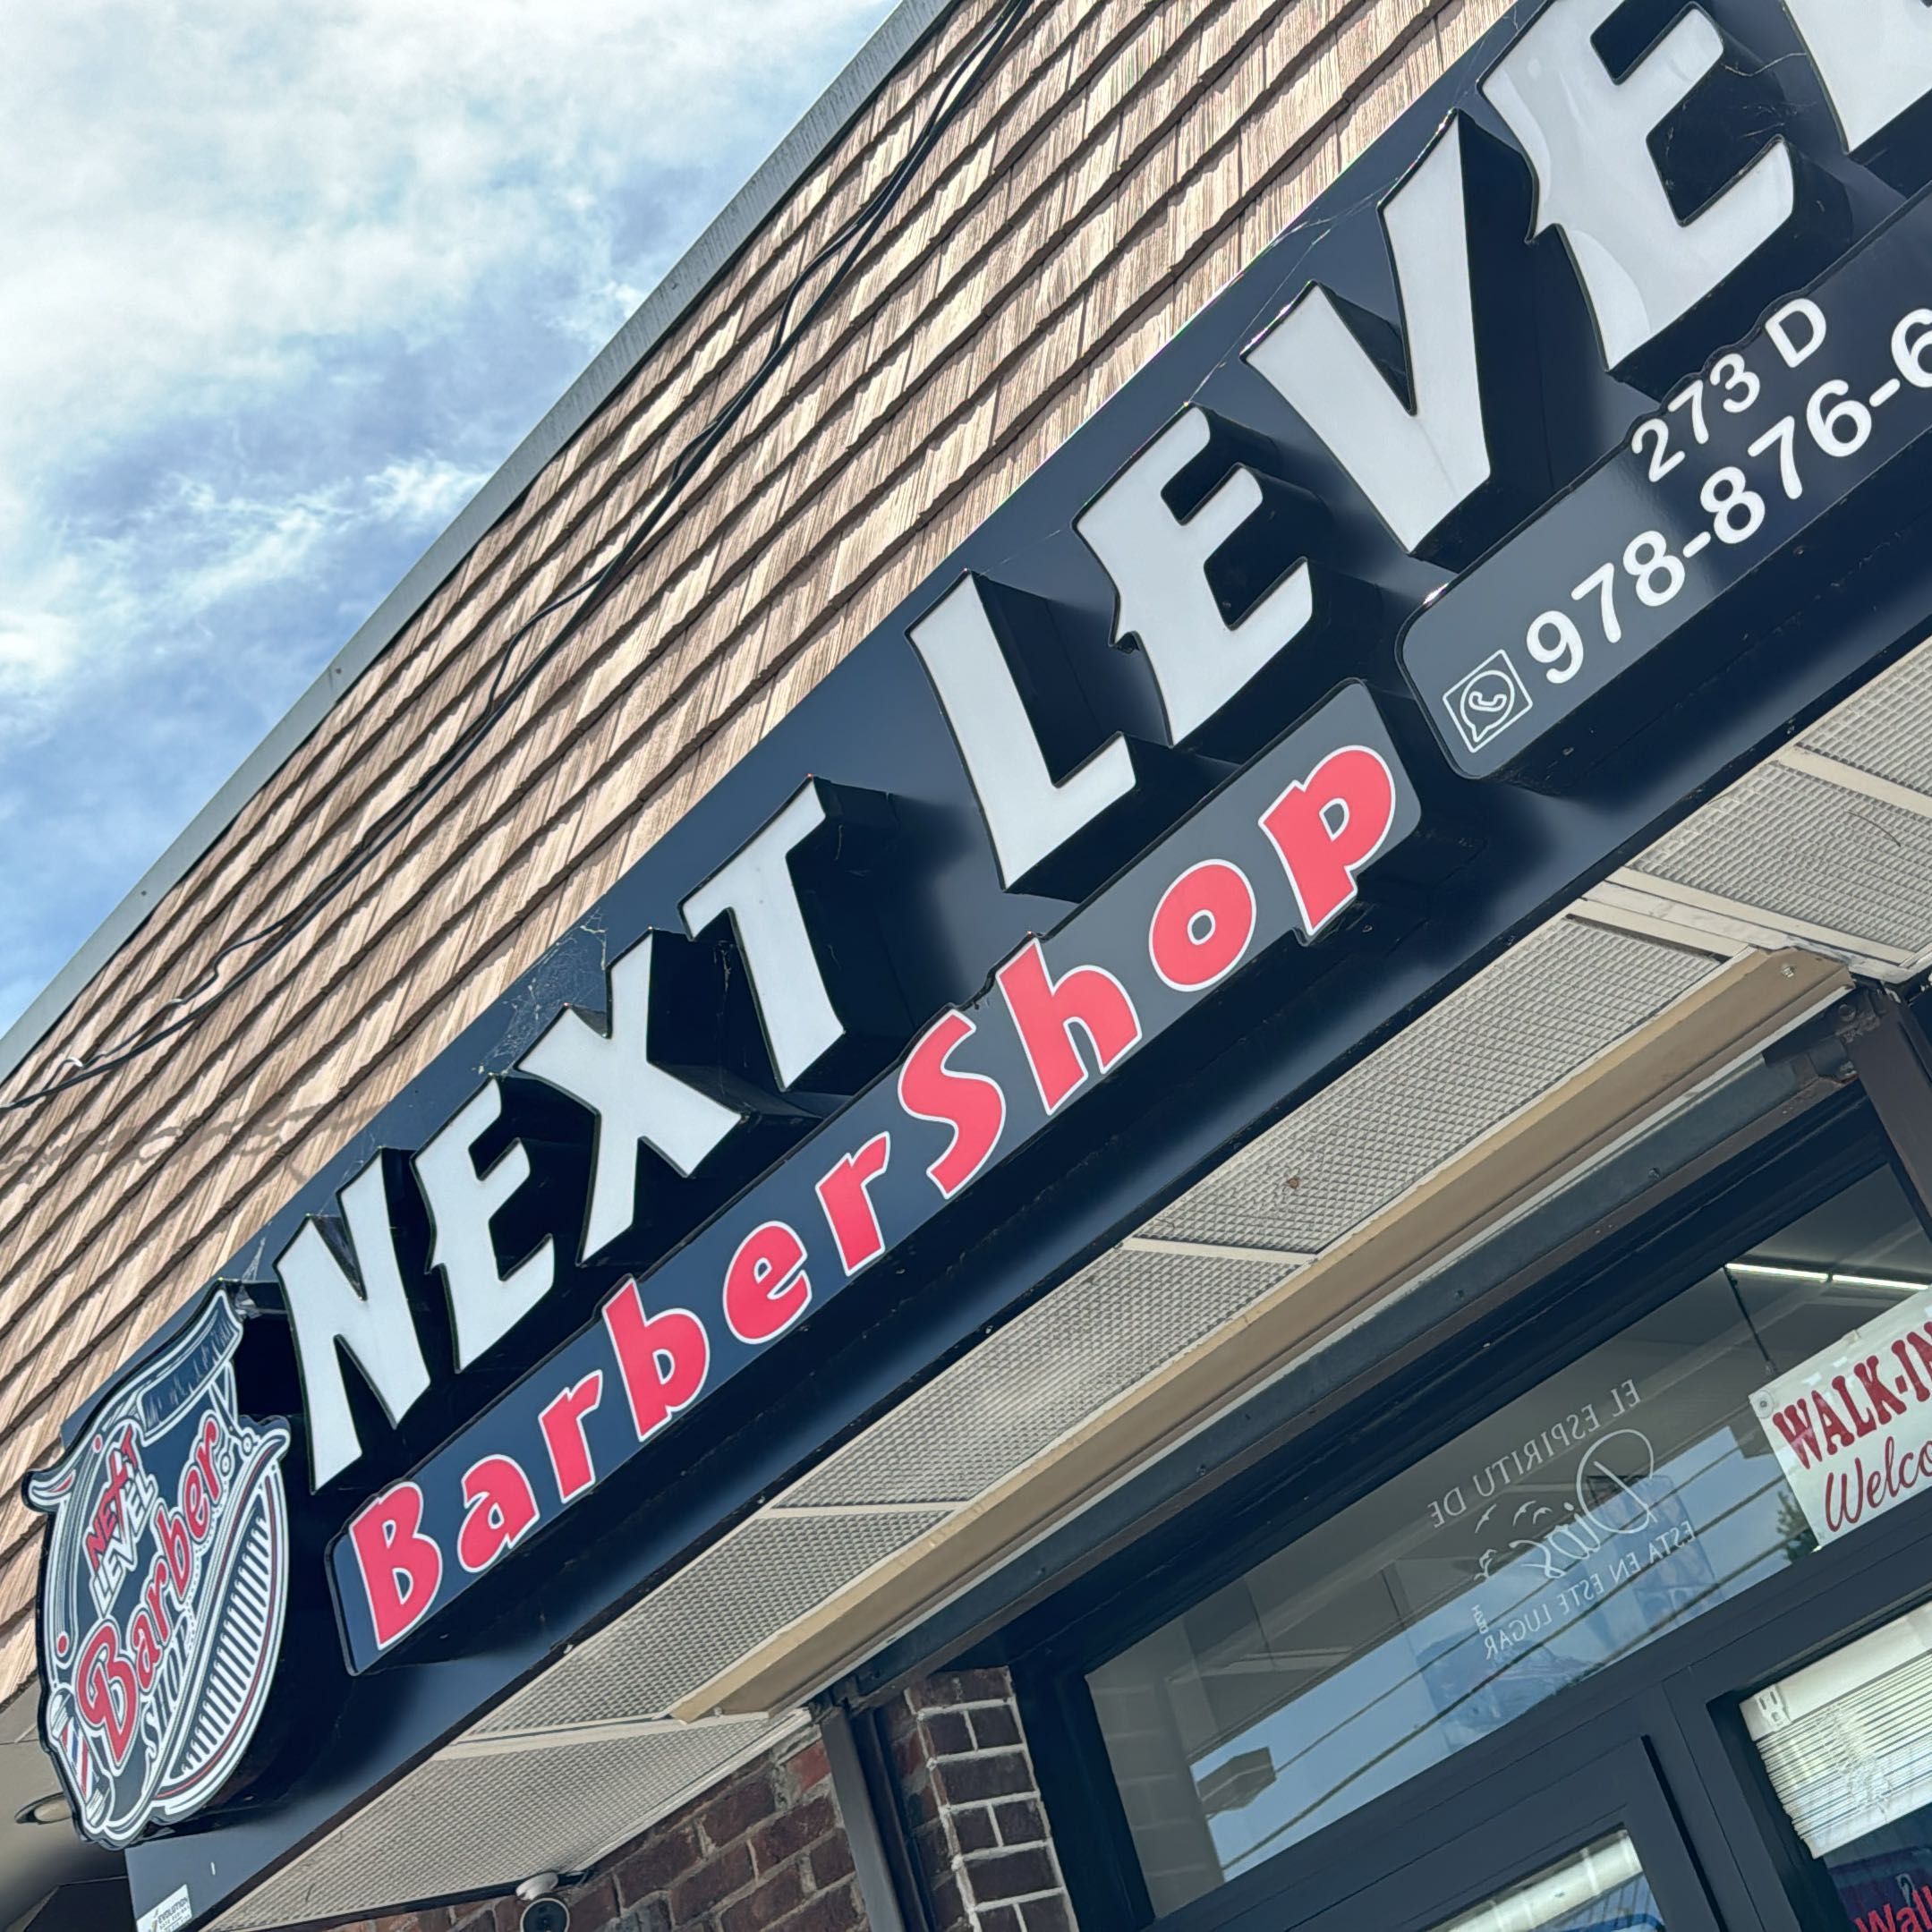 Next Level Barbershop, 273 south union st, 1, Lawrence, 01843